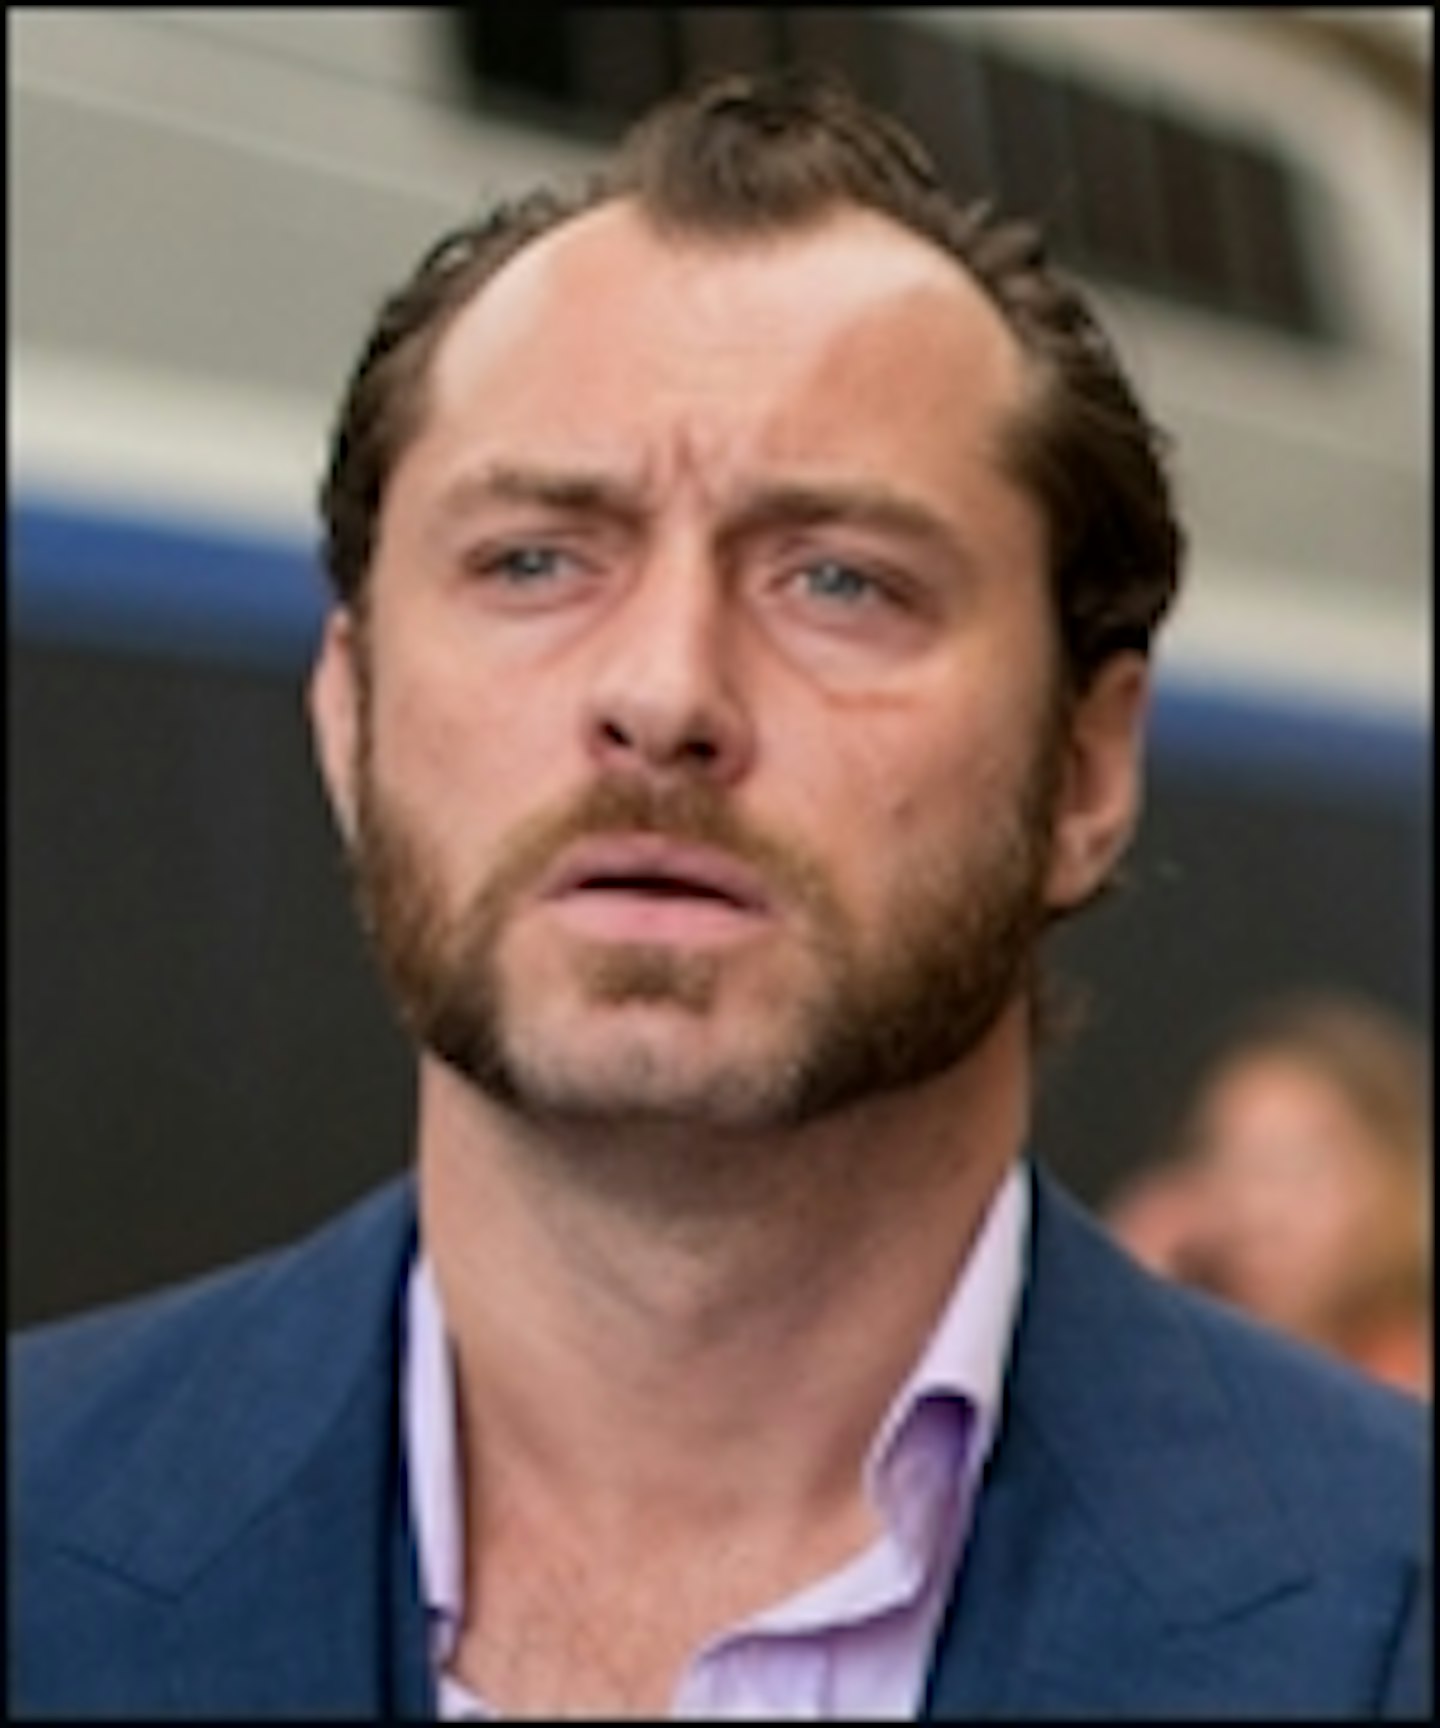 Dom Hemingway Pic Sees Jude Law And Richard E. Grant Stuck In The '70s